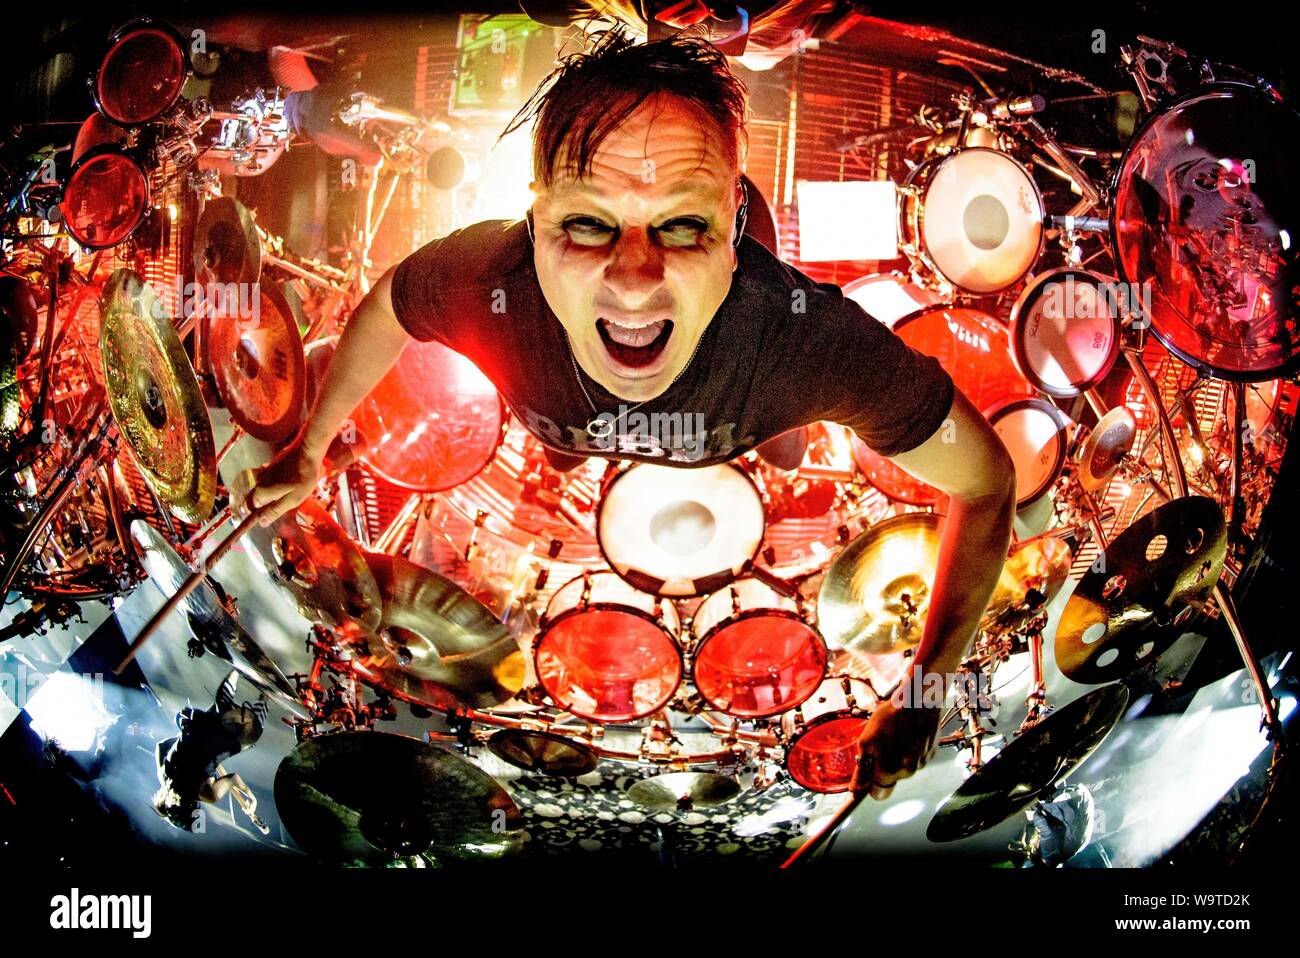 August 14, 2019, Toronto, Ontario, Canada: Drummer RAY LUZIER of an American nu metal band 'Korn' performs at Budweiser Stage in Toronto. (Credit Image: © Igor Vidyashev/ZUMA Wire) Stock Photo